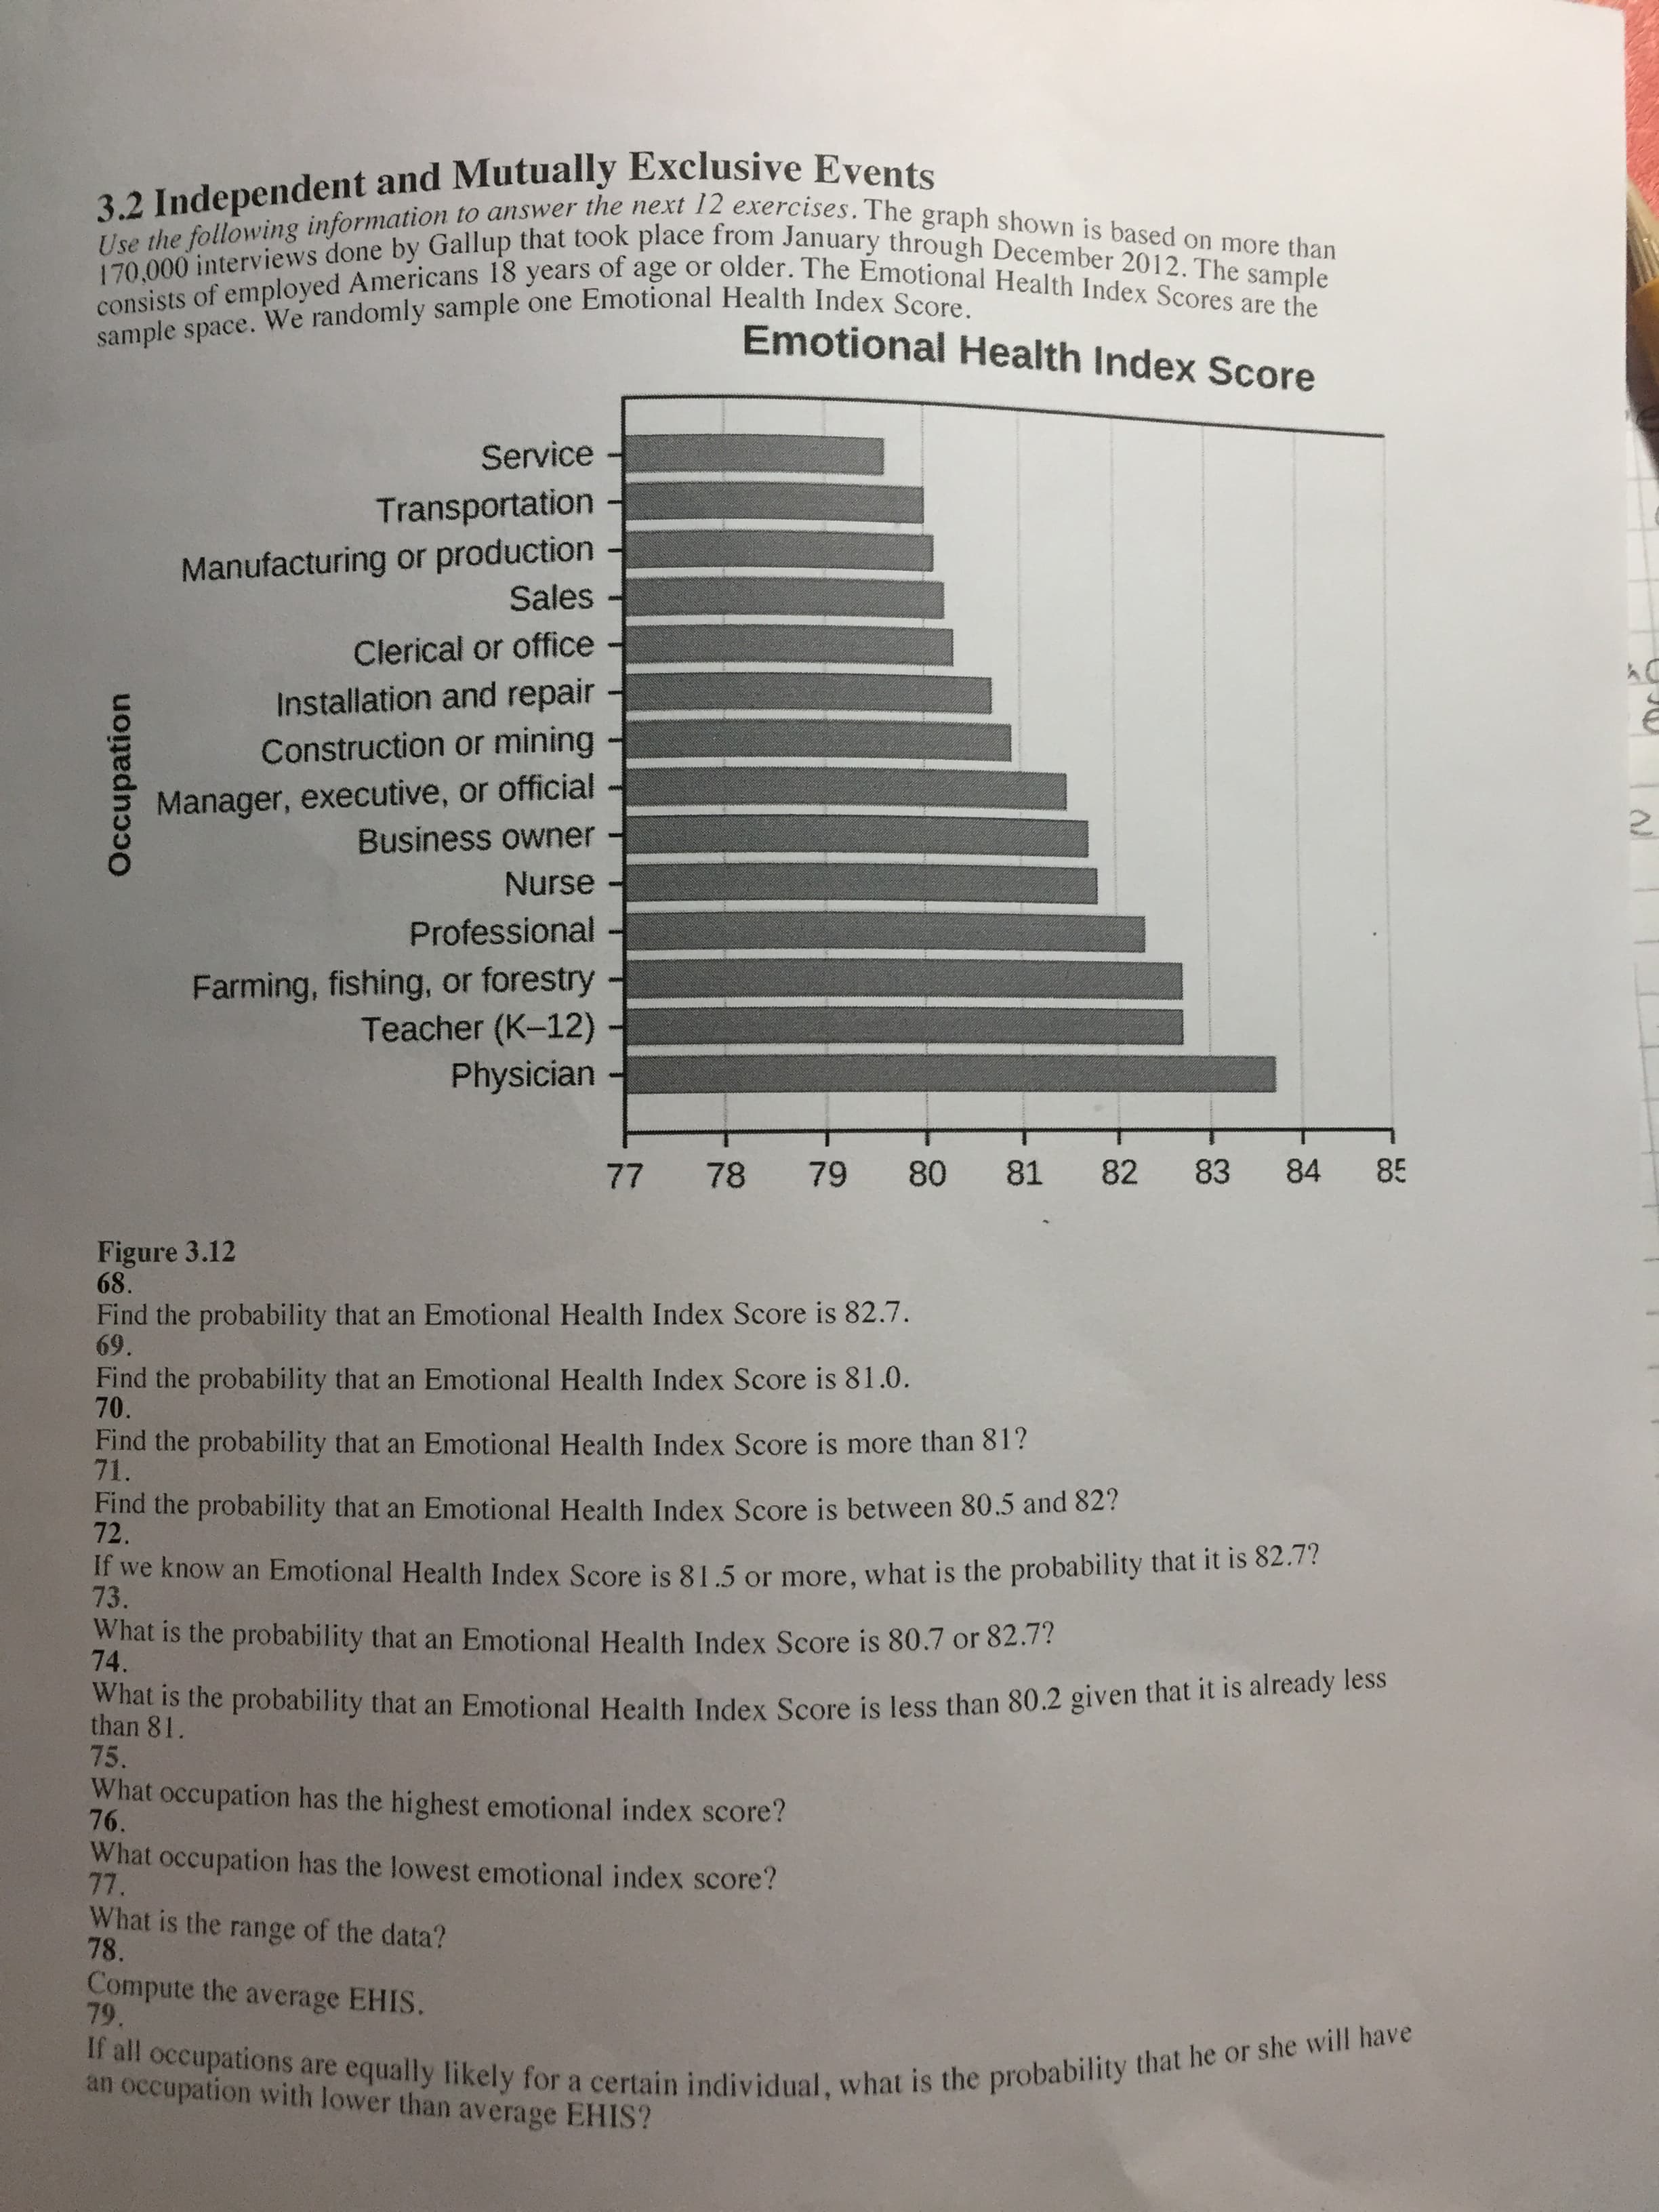 Find the probability that an Emotional Health Index Score is 82.7.
69.
Find the probability that an Emotional Health Index Score is 81.0.
70.
68.
Find the probability that an Emotional Health Index Score is more than 81?
